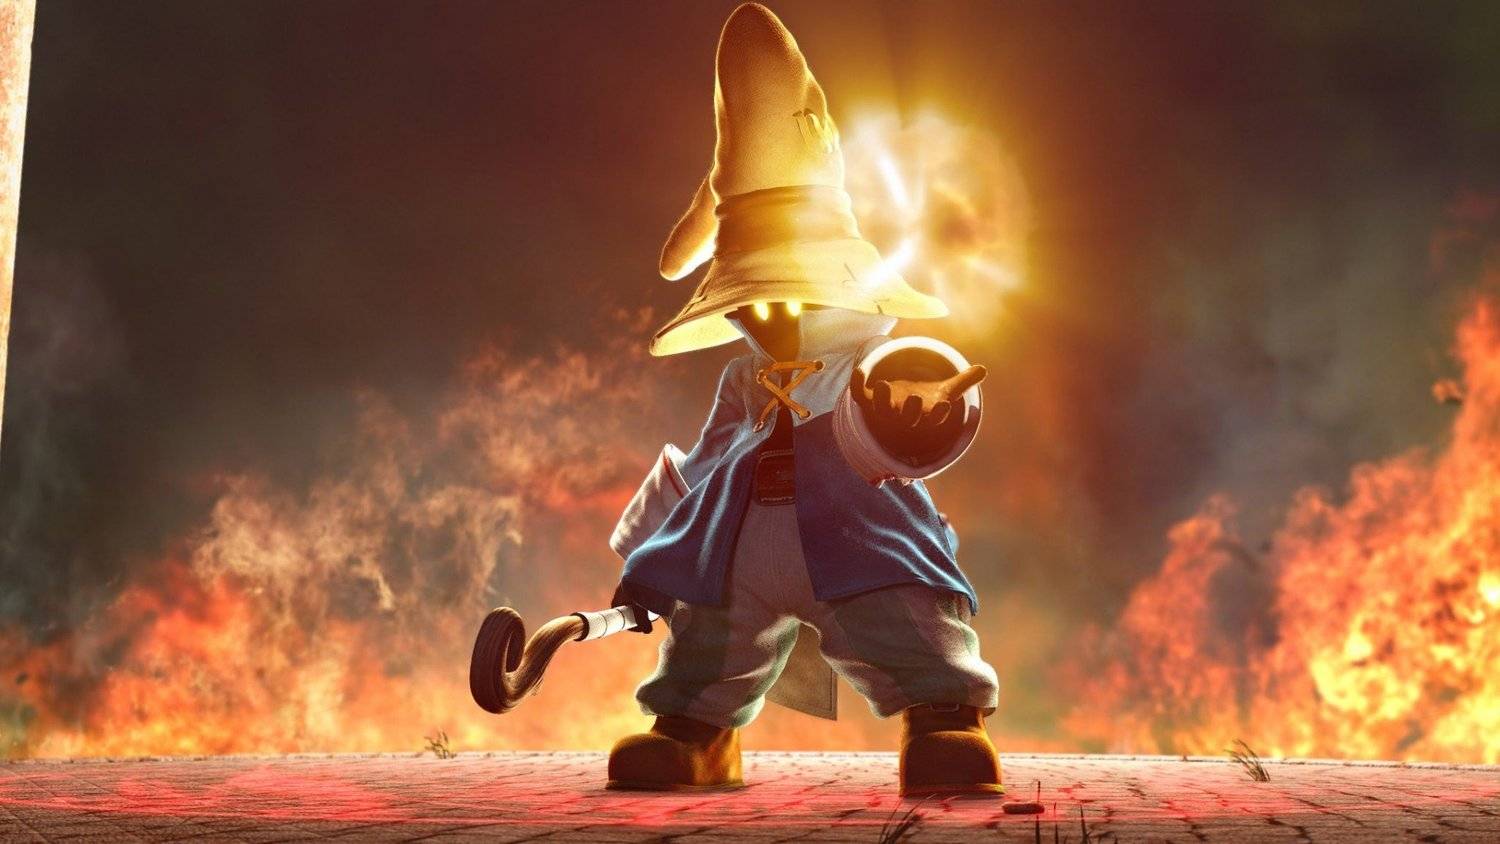 Final Fantasy Ix Switch Is It A Bad Port And Why Are Gamers Angry About It